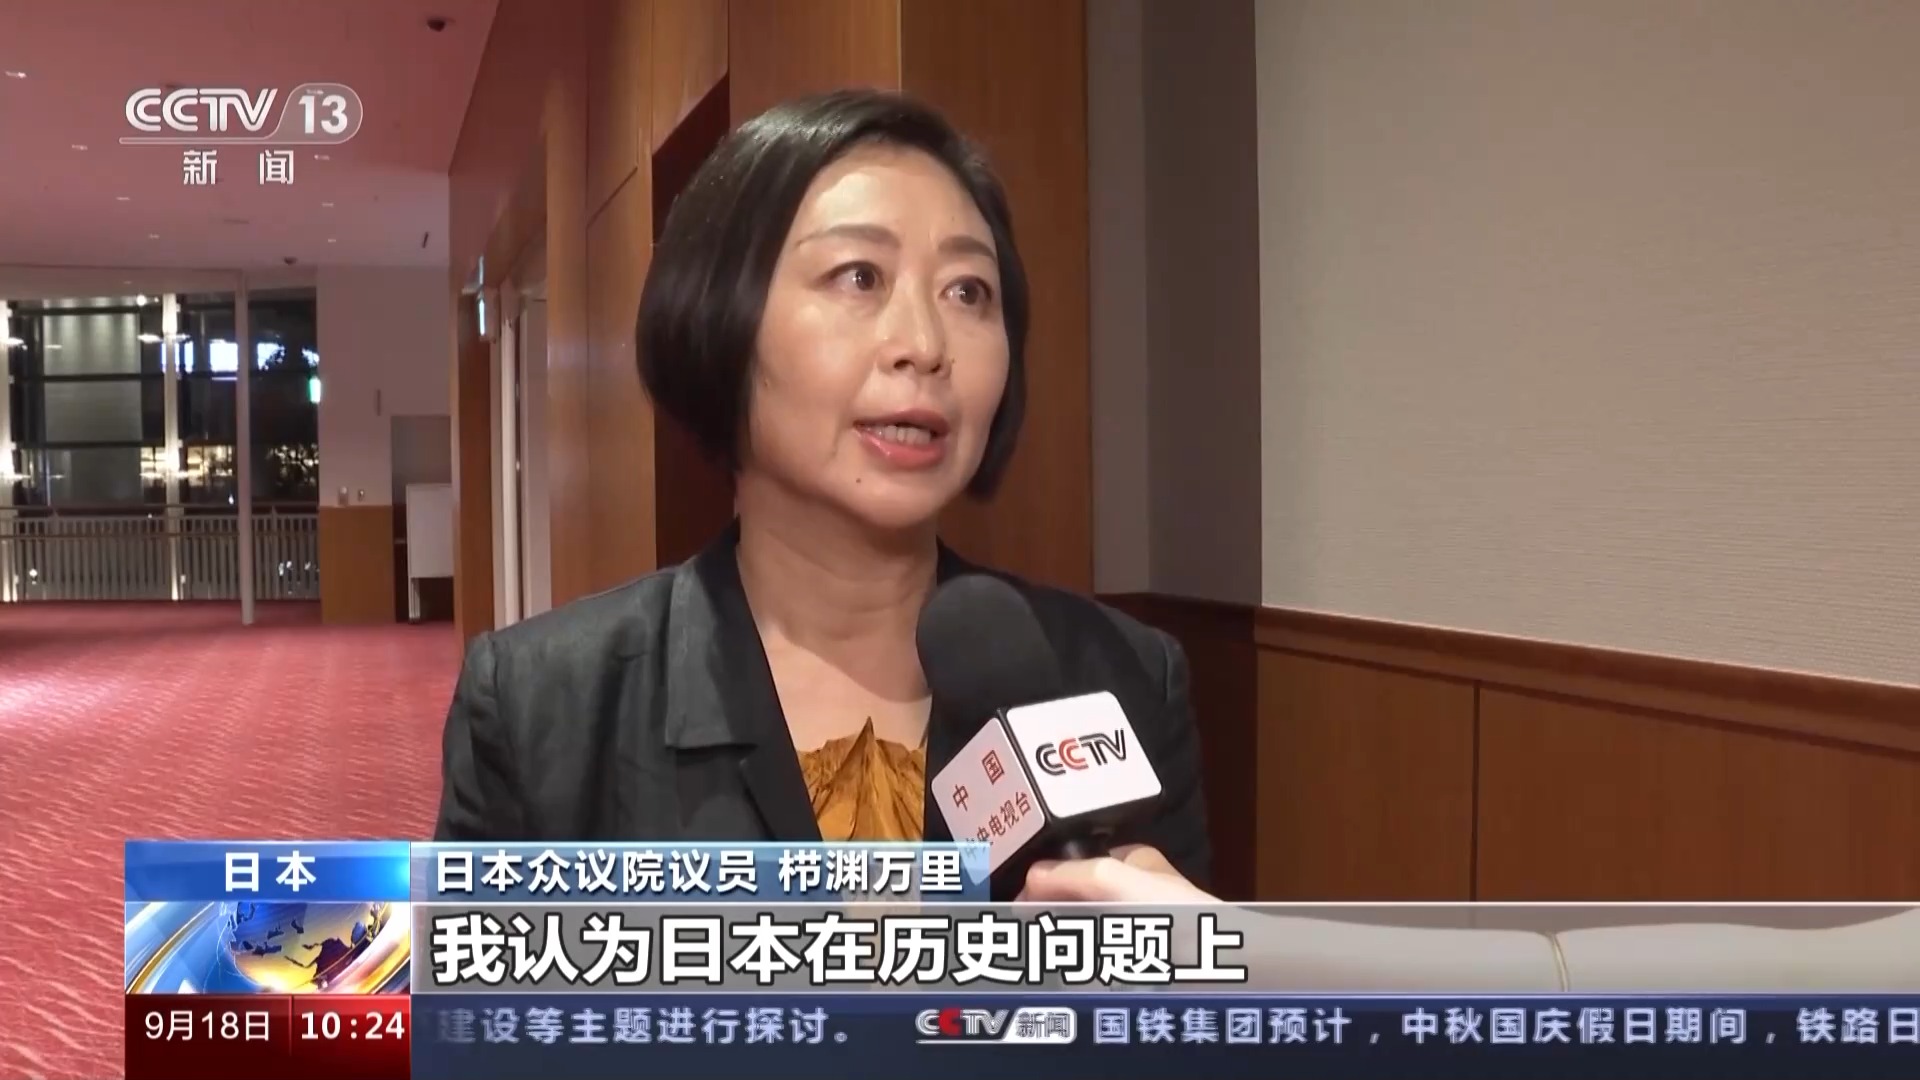 Mari Kushibuchi urges the Japanese government to face the history during an interview. /China Media Group